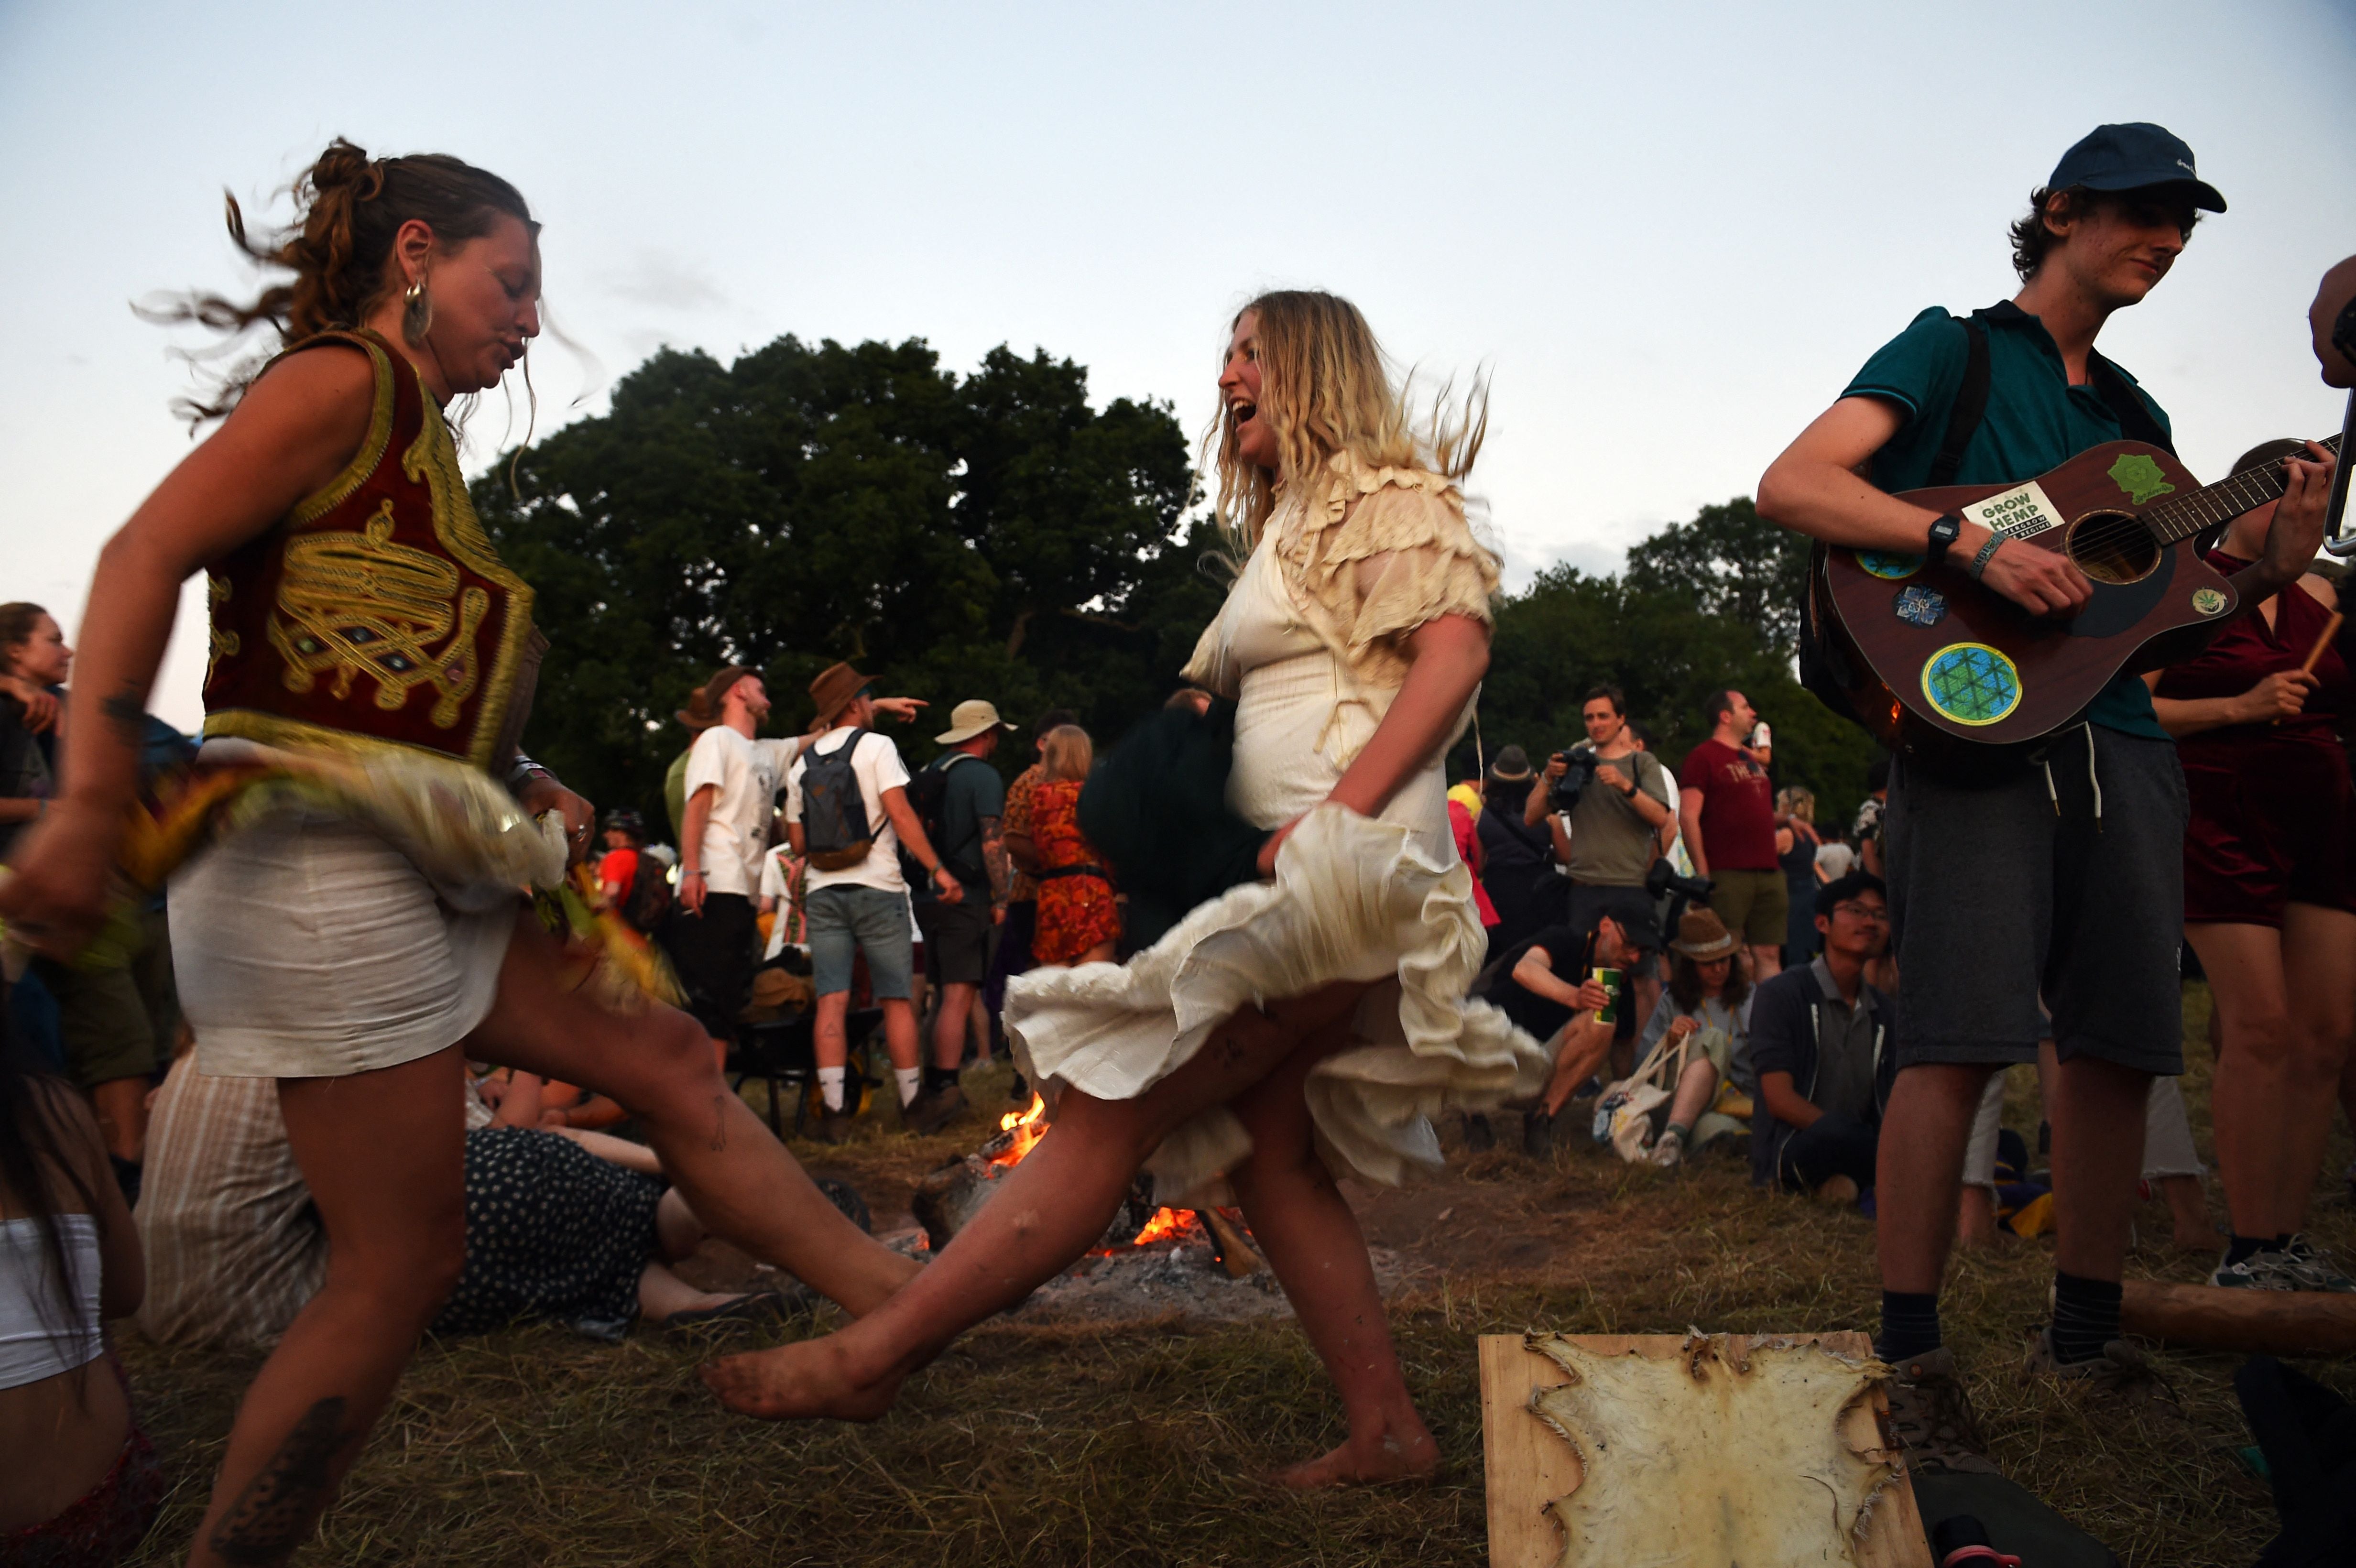 A festivalgoer plays the guitar as others dance around a bonfire